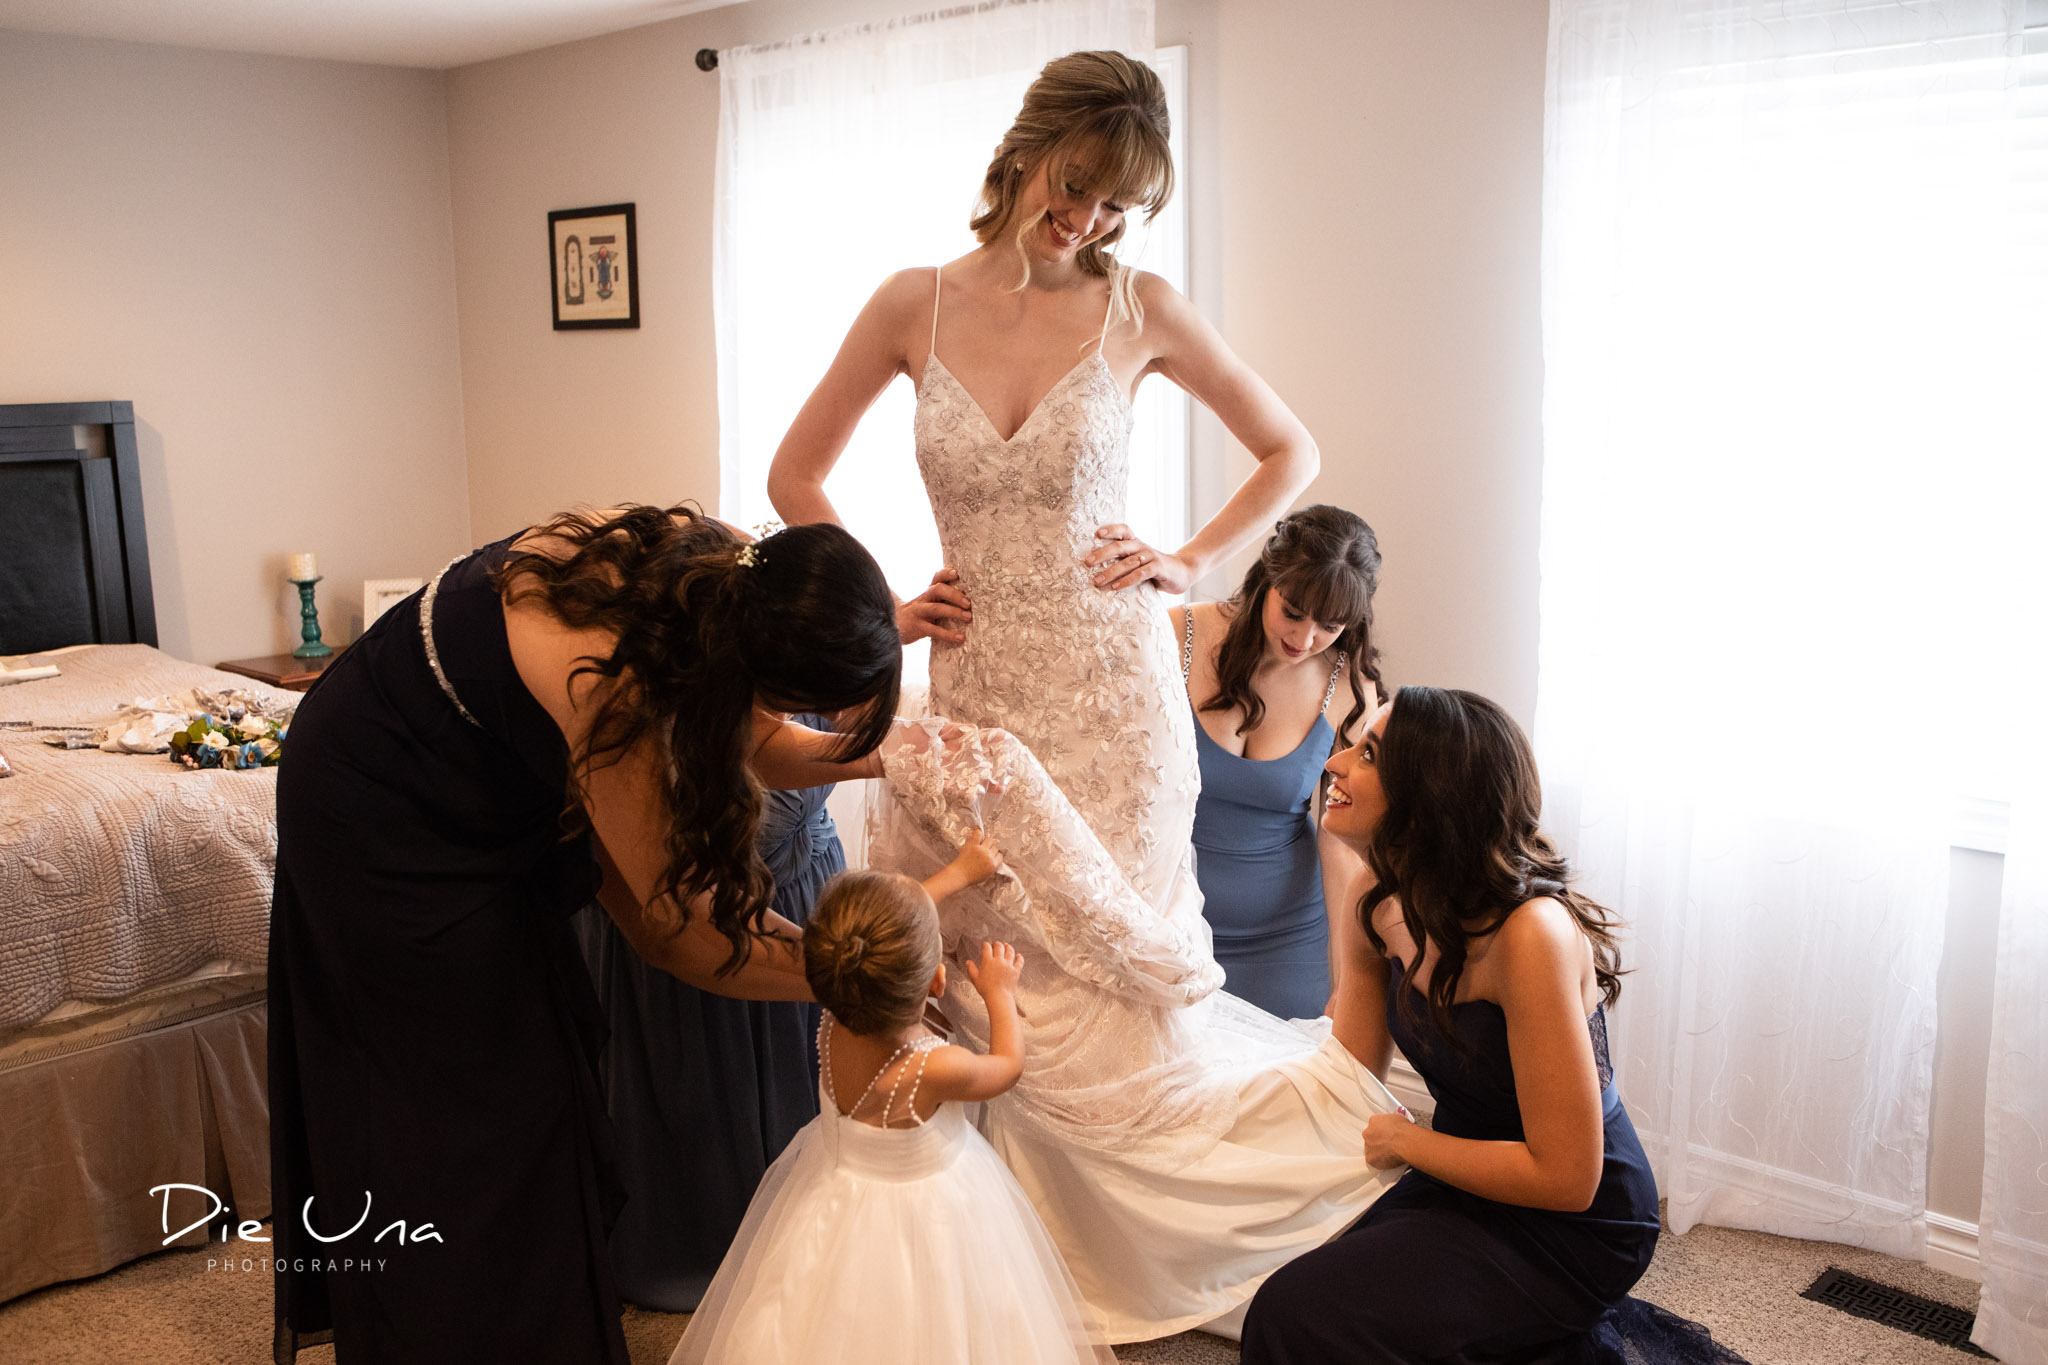 all the bridesmaids and flower girl helping the bride get her wedding dress on.jpg